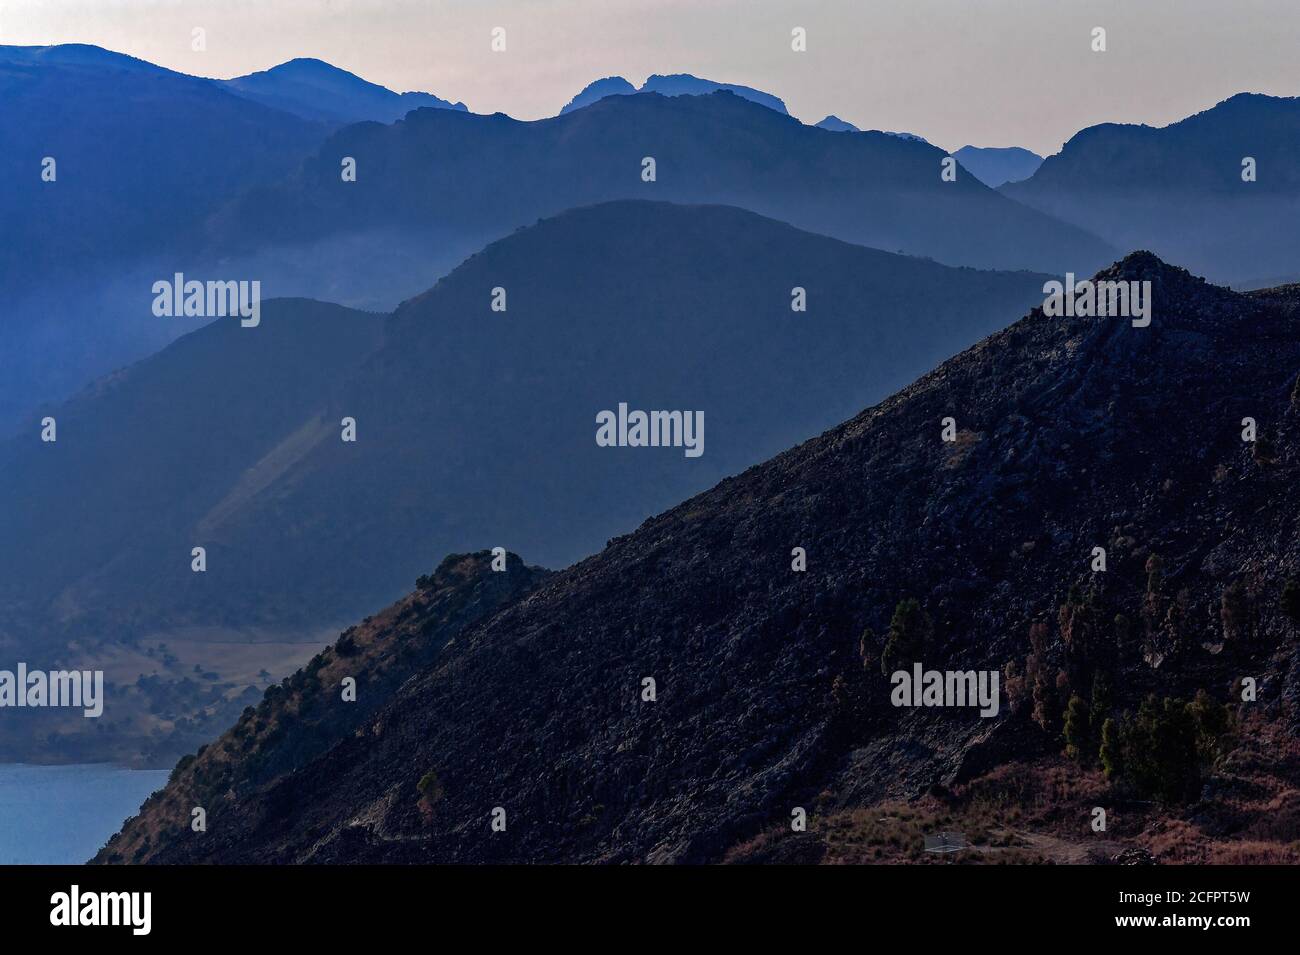 Setting sun throws details of boulder-strewn hillside above Lago Rosamarina in Sicily, Italy, into contrast against more distant peaks and rugged ridges. Stock Photo